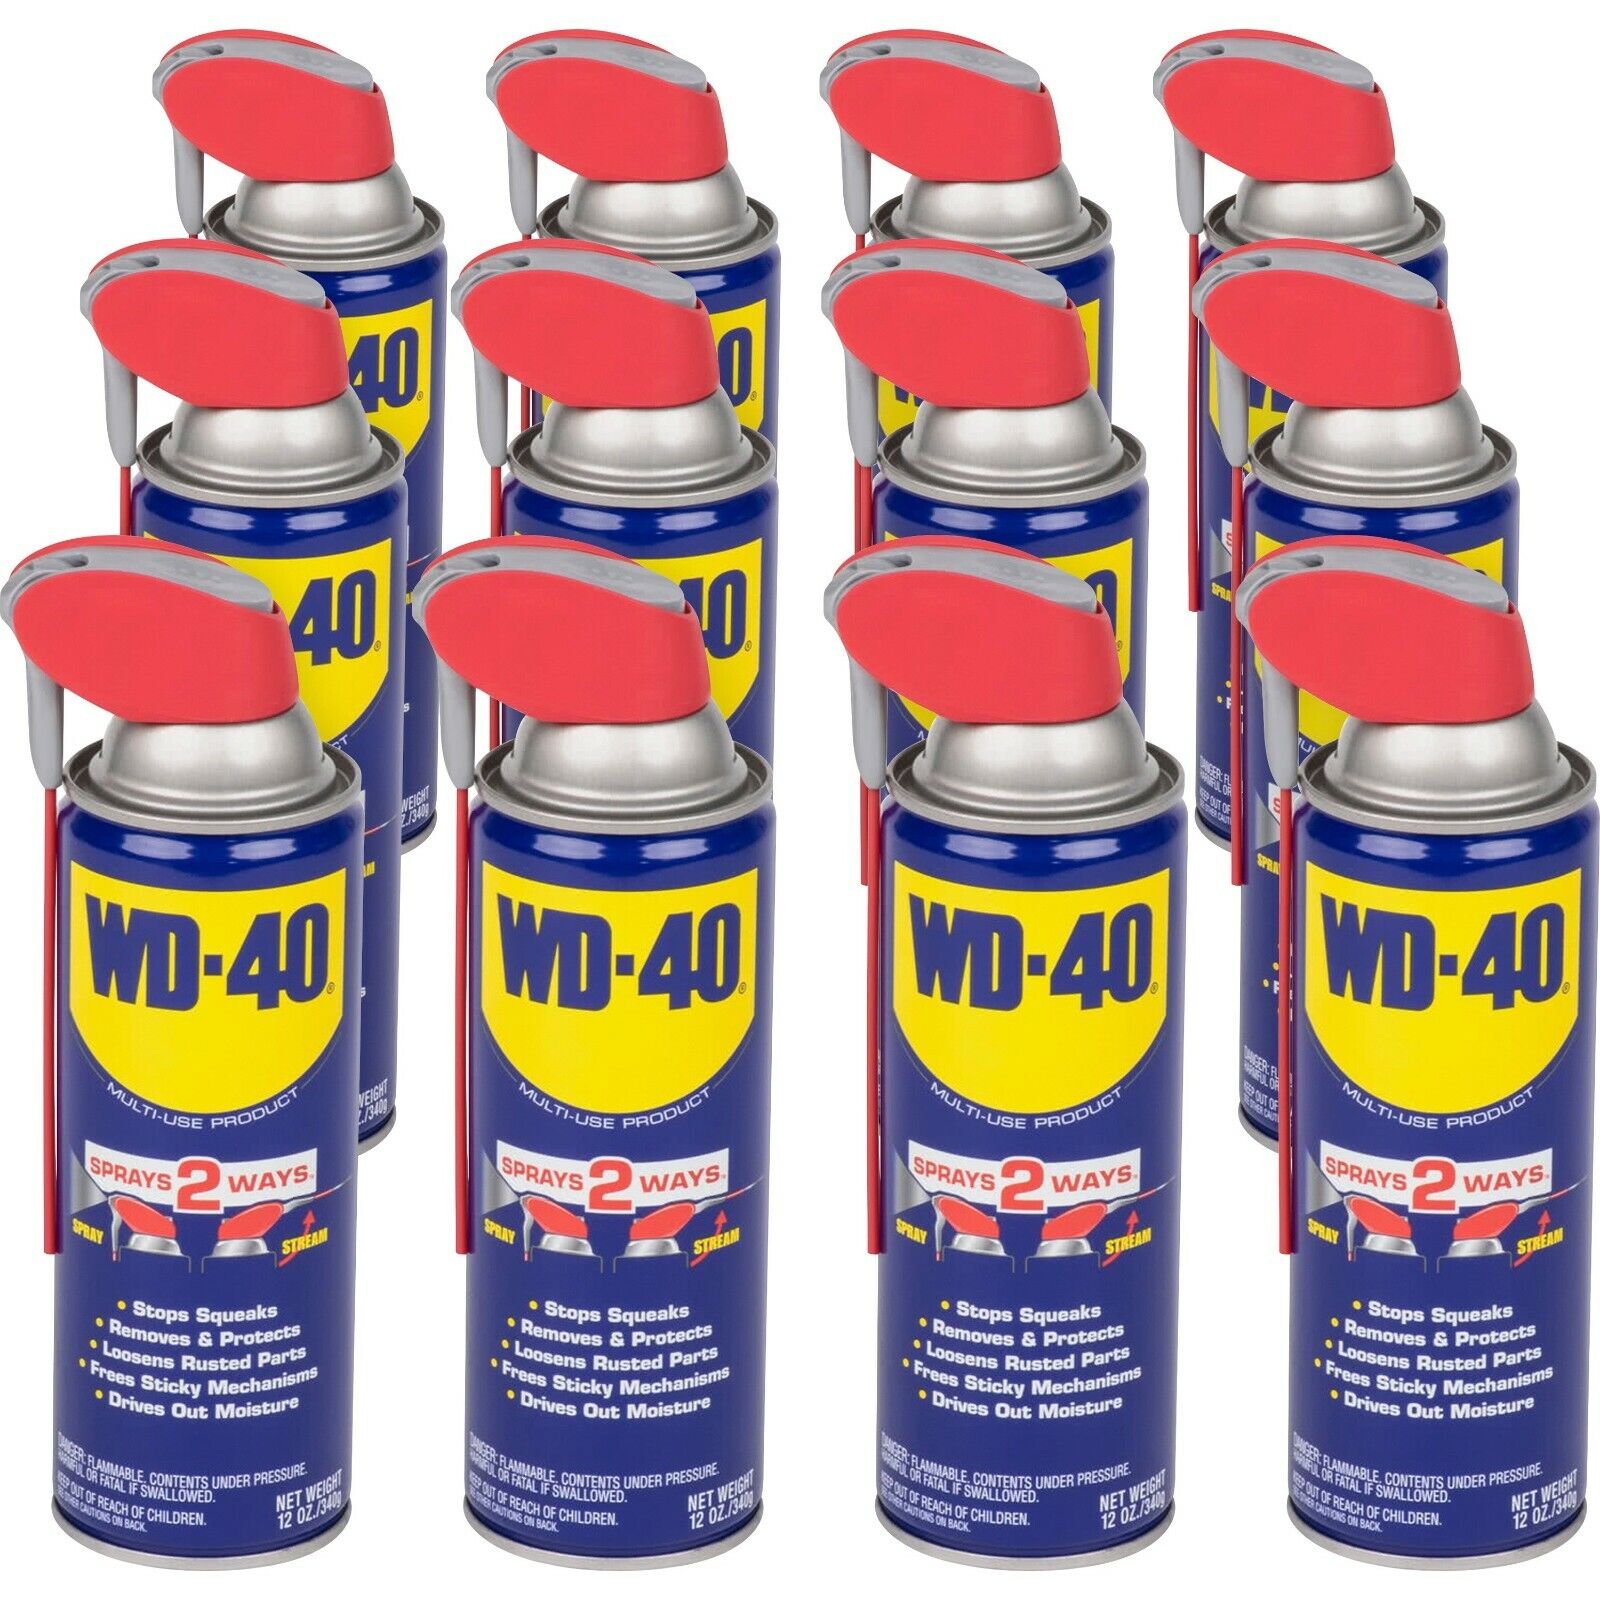 WD-40 with Smart Straw (Case of 12 - 12 Oz Cans)